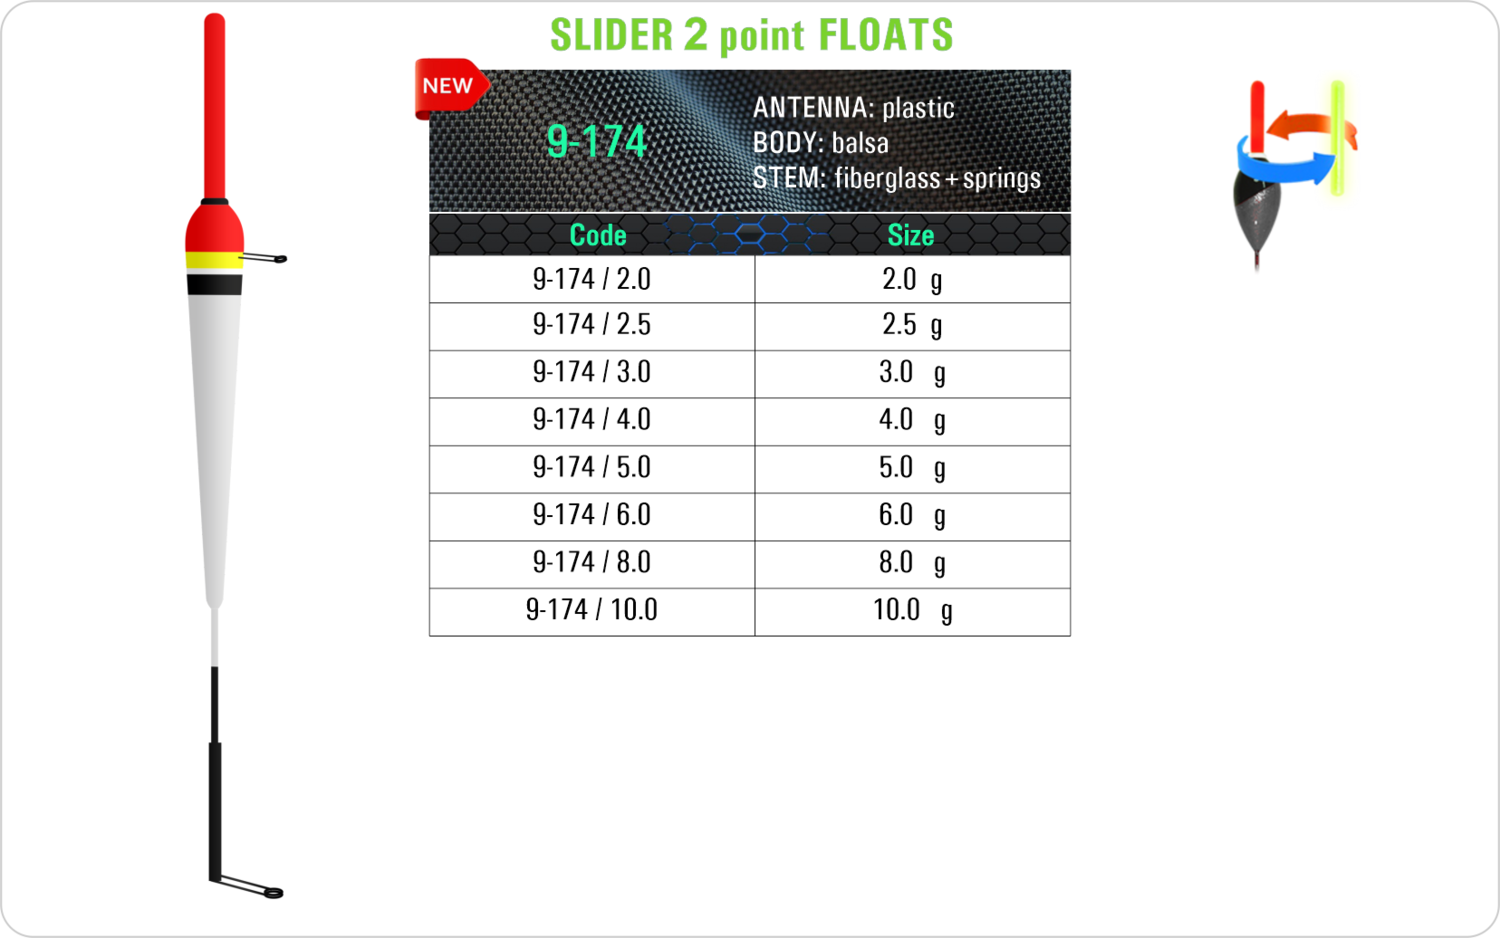 SF 9-174 - Lake and river float model and table containing an additional information about this float with different codes, sizes, types of the body, the stem and the antenna of the float.